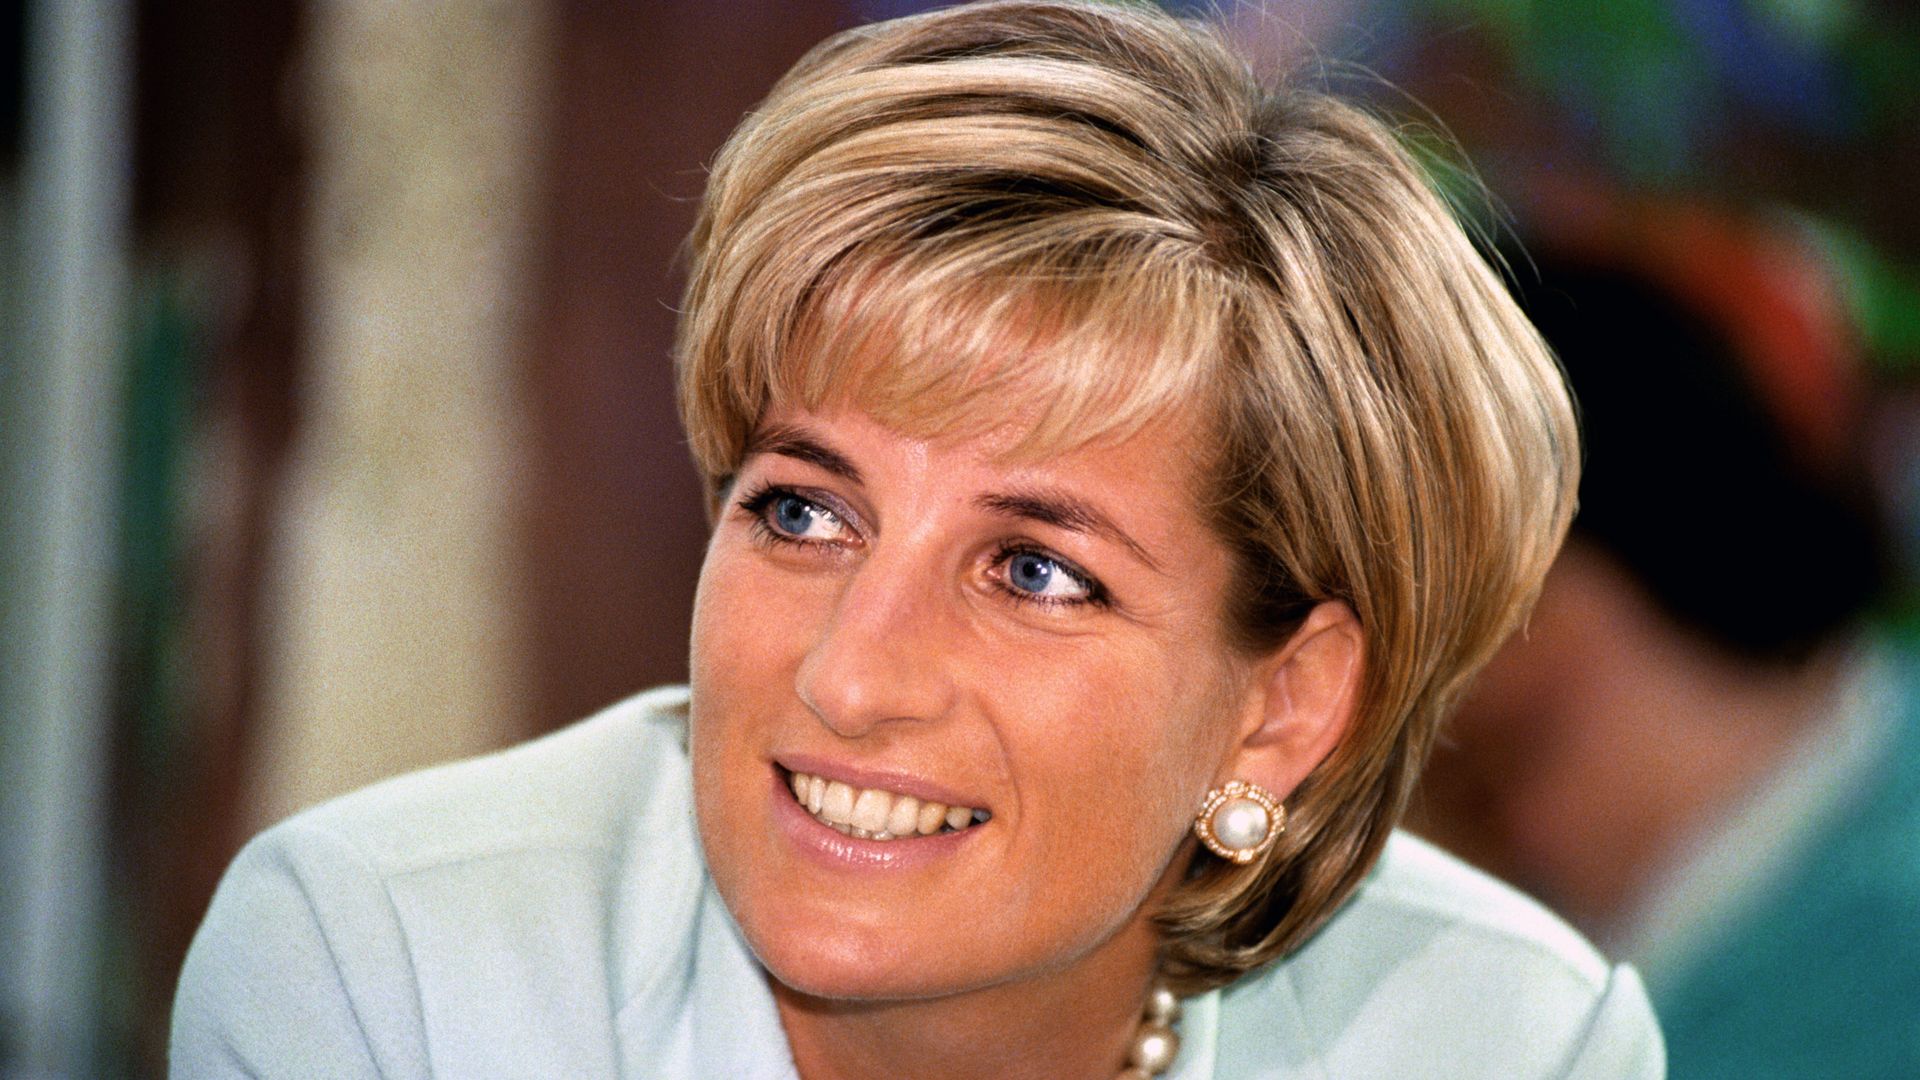 Fans express 'love' for unexpected new arrivals at Princess Diana's family home